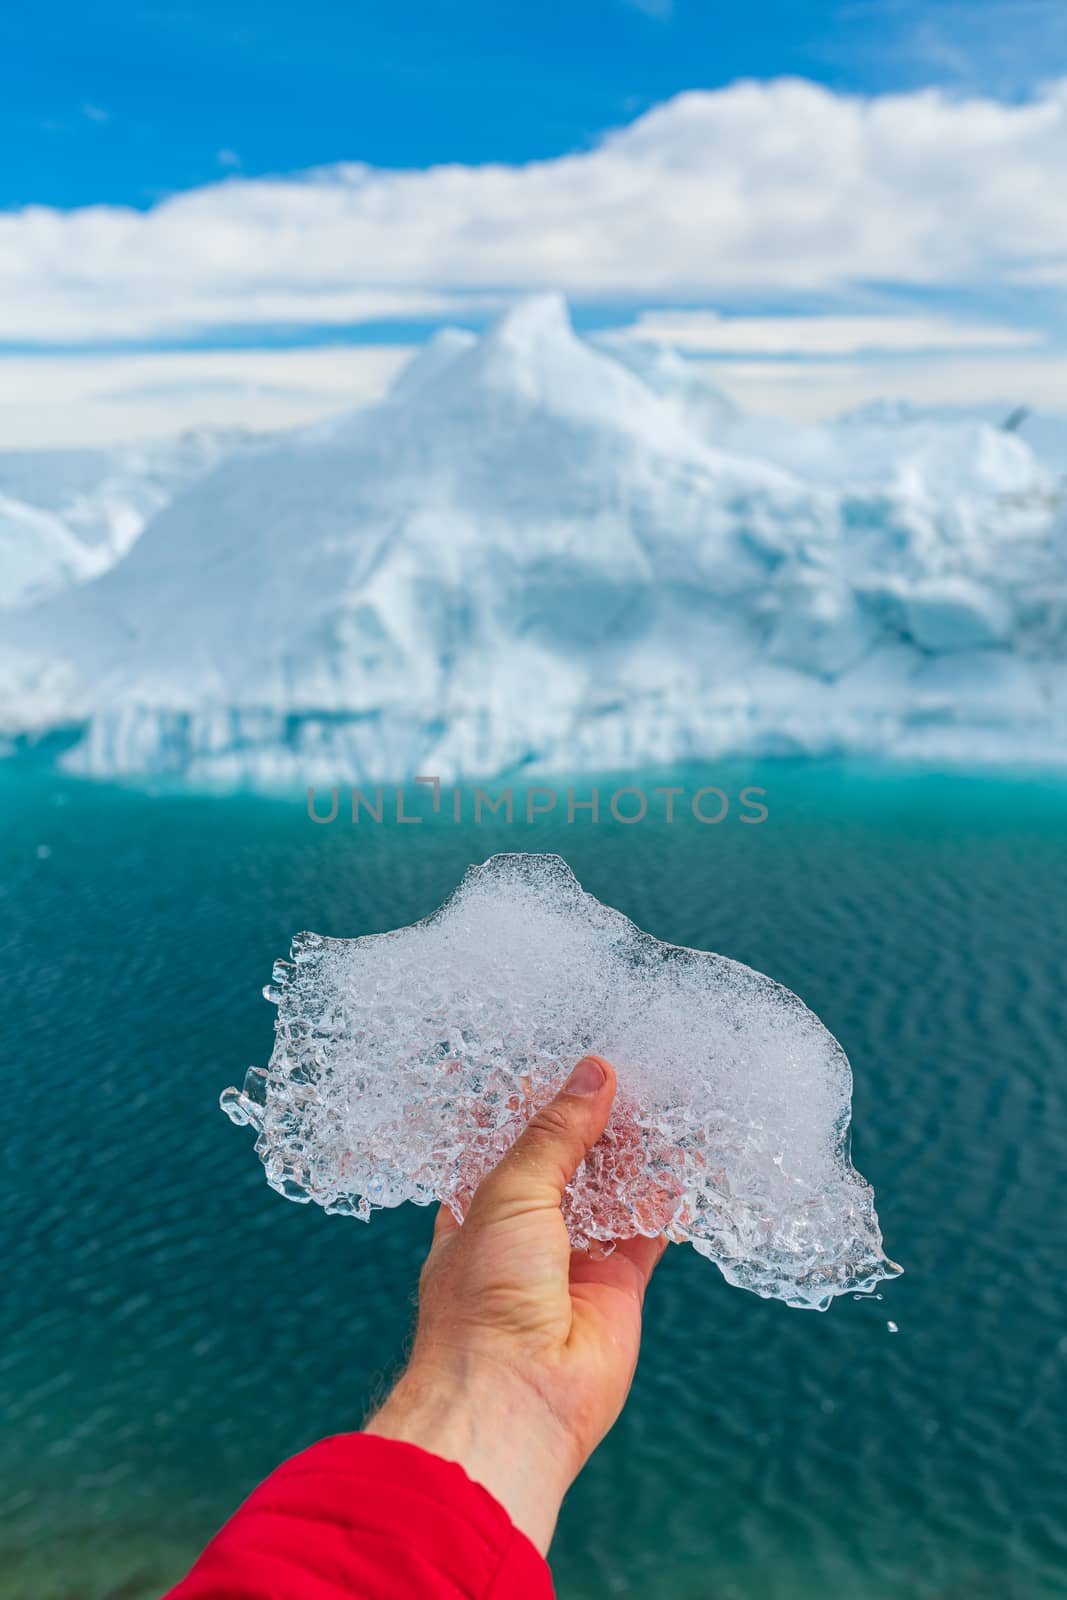 Save the climate! Global warming, climate change and Environmental protection concept with icebergs on Greenland. Hand holding melting ice in front of giant iceberg in Ilulissat icefjord on Greenland.